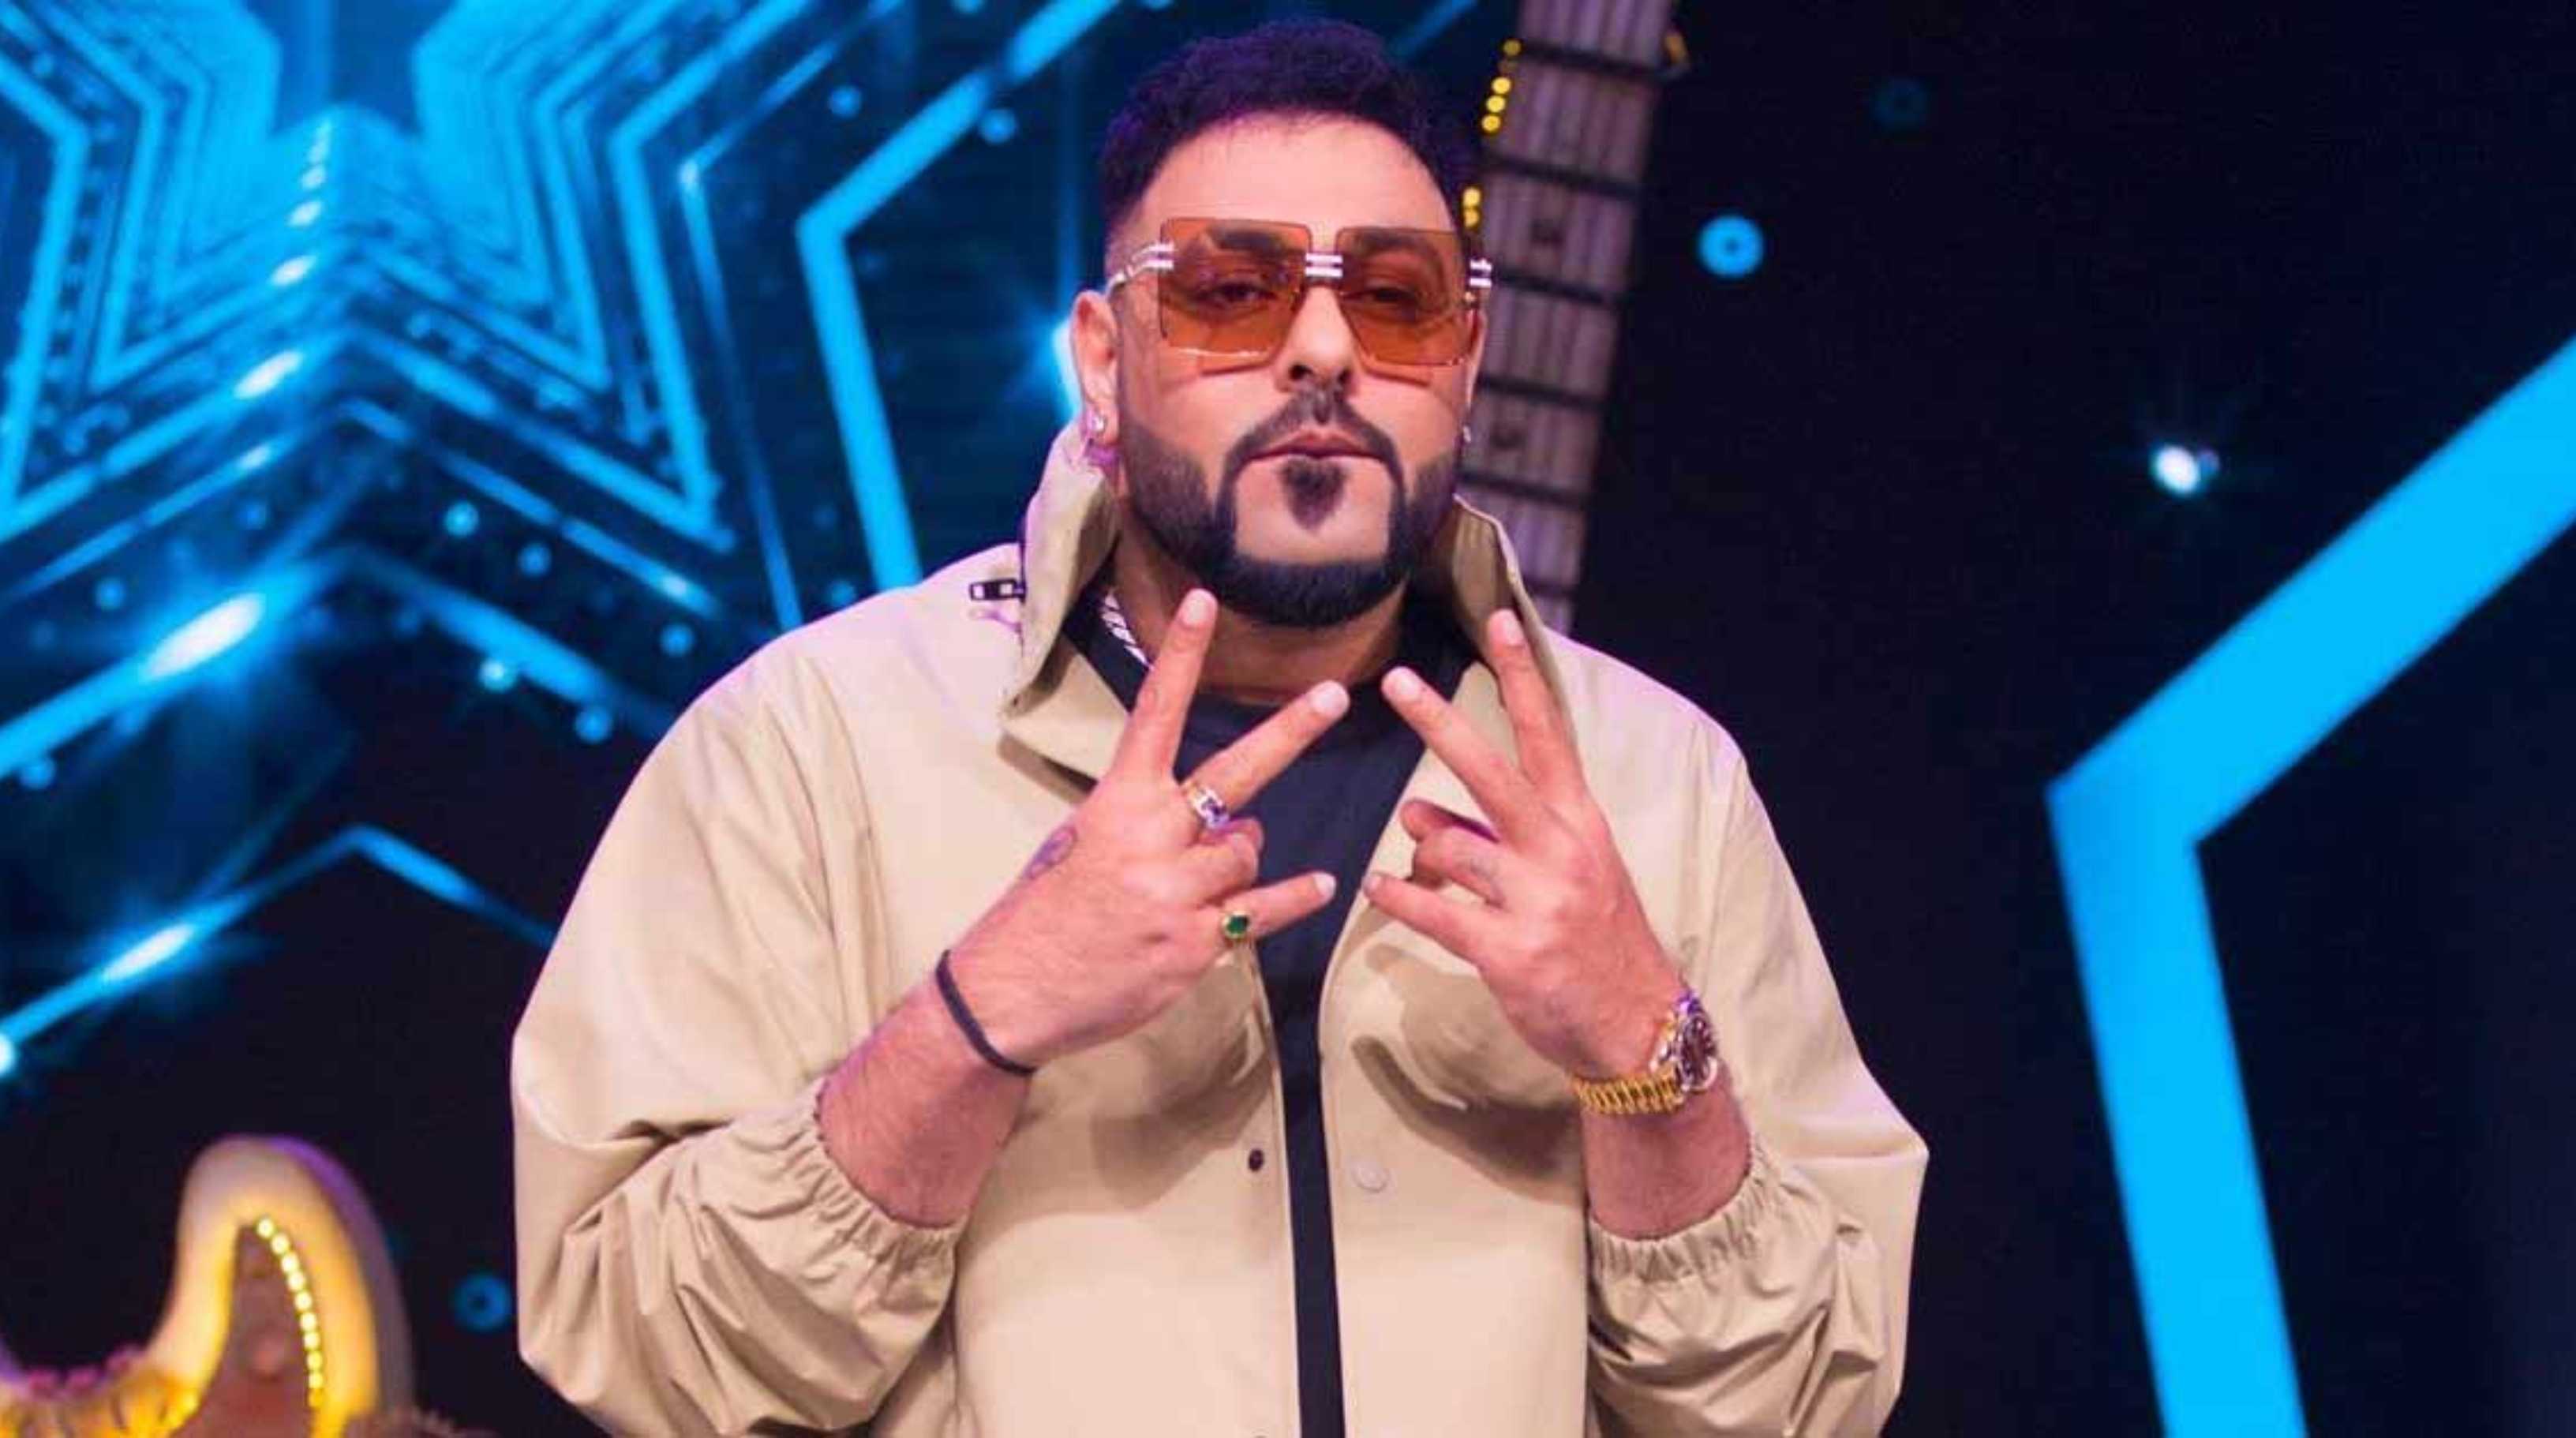 ‘Goodshaah’: Badshah issues apology for hurting sentiments with Sanak, will be making changes; fans react